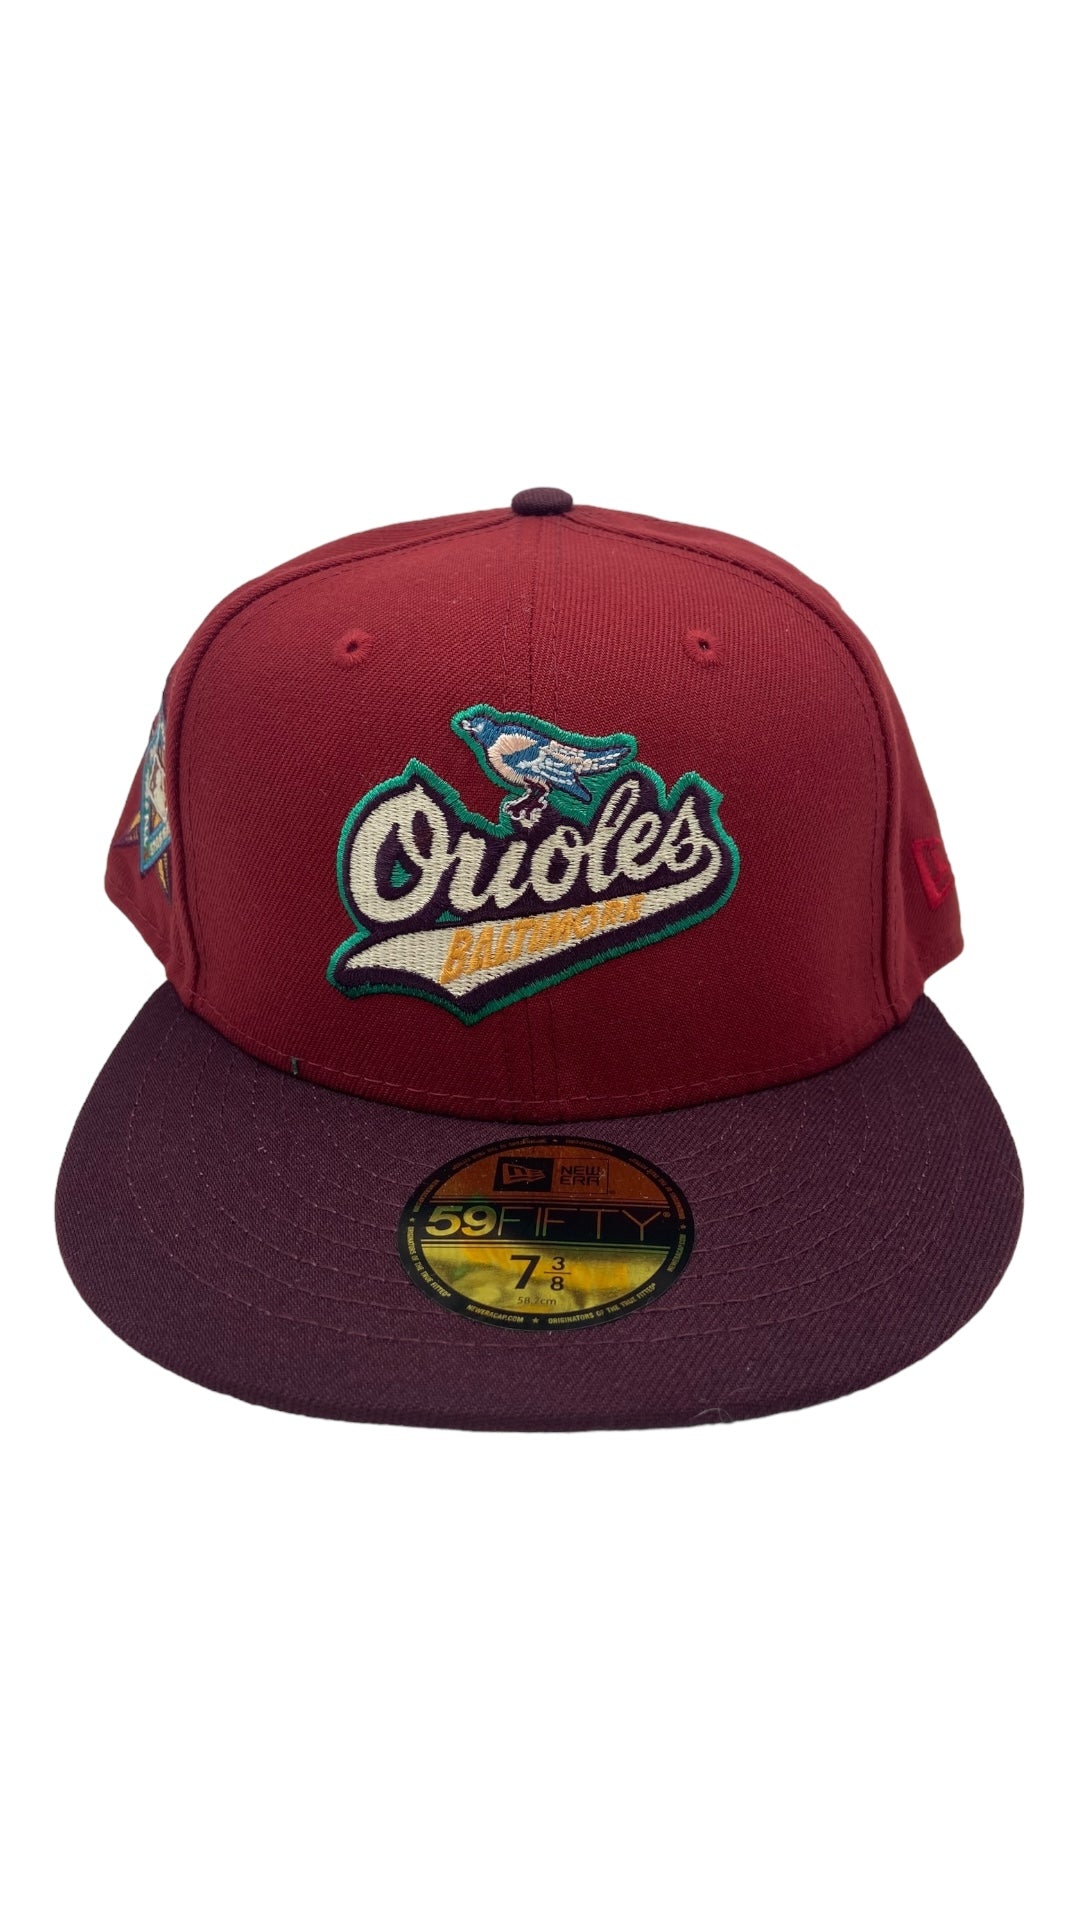 Baltimore Orioles All Star Game Red/Maroon Fitted Hat